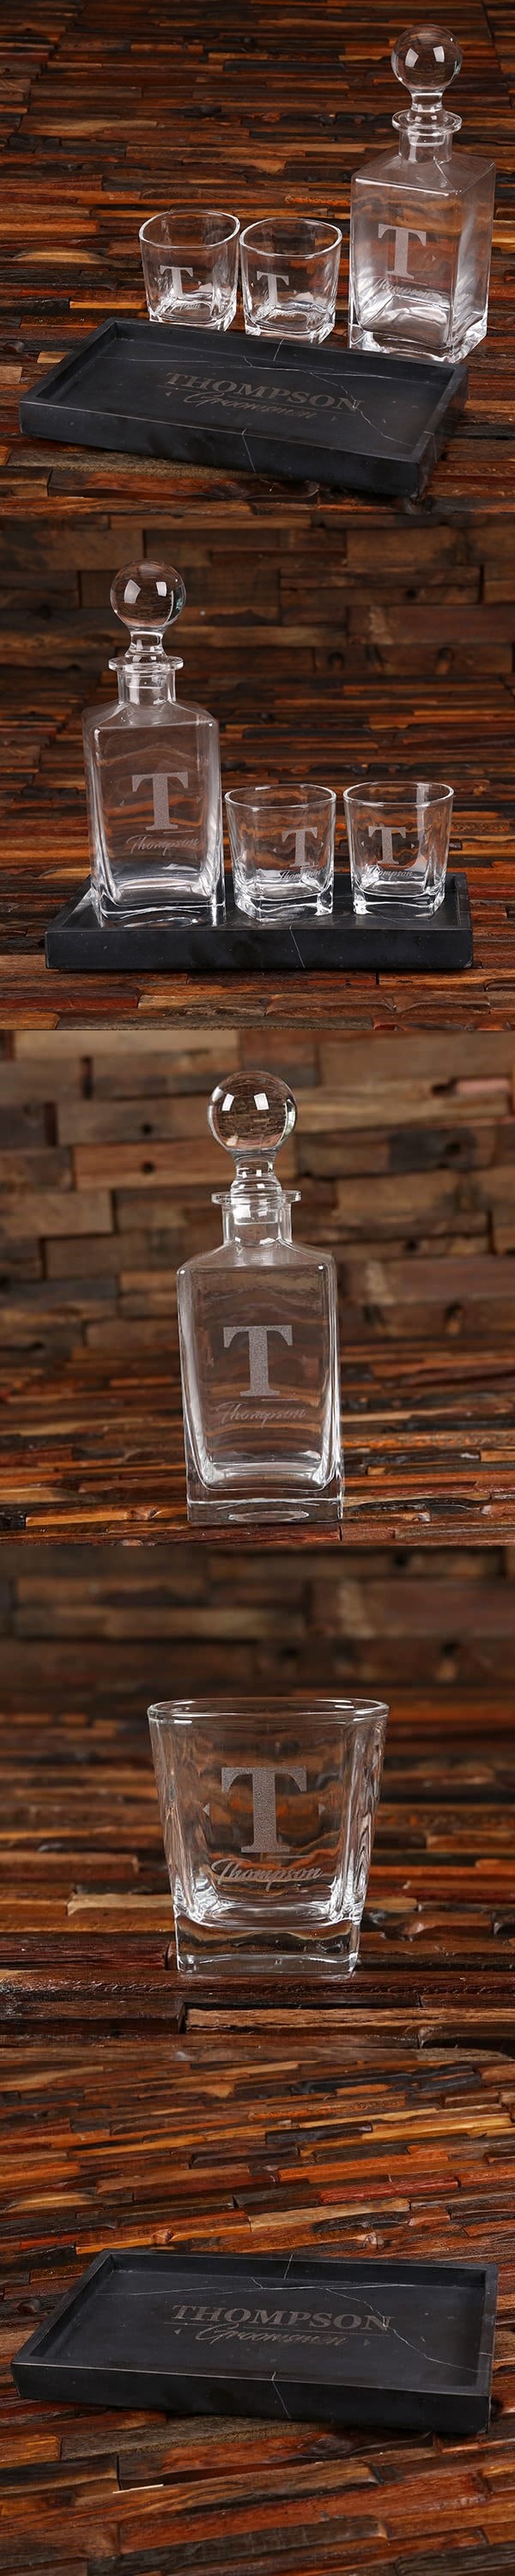 Personalized Whiskey Decanter, Rocks Glasses and Marble Bar Tray Set